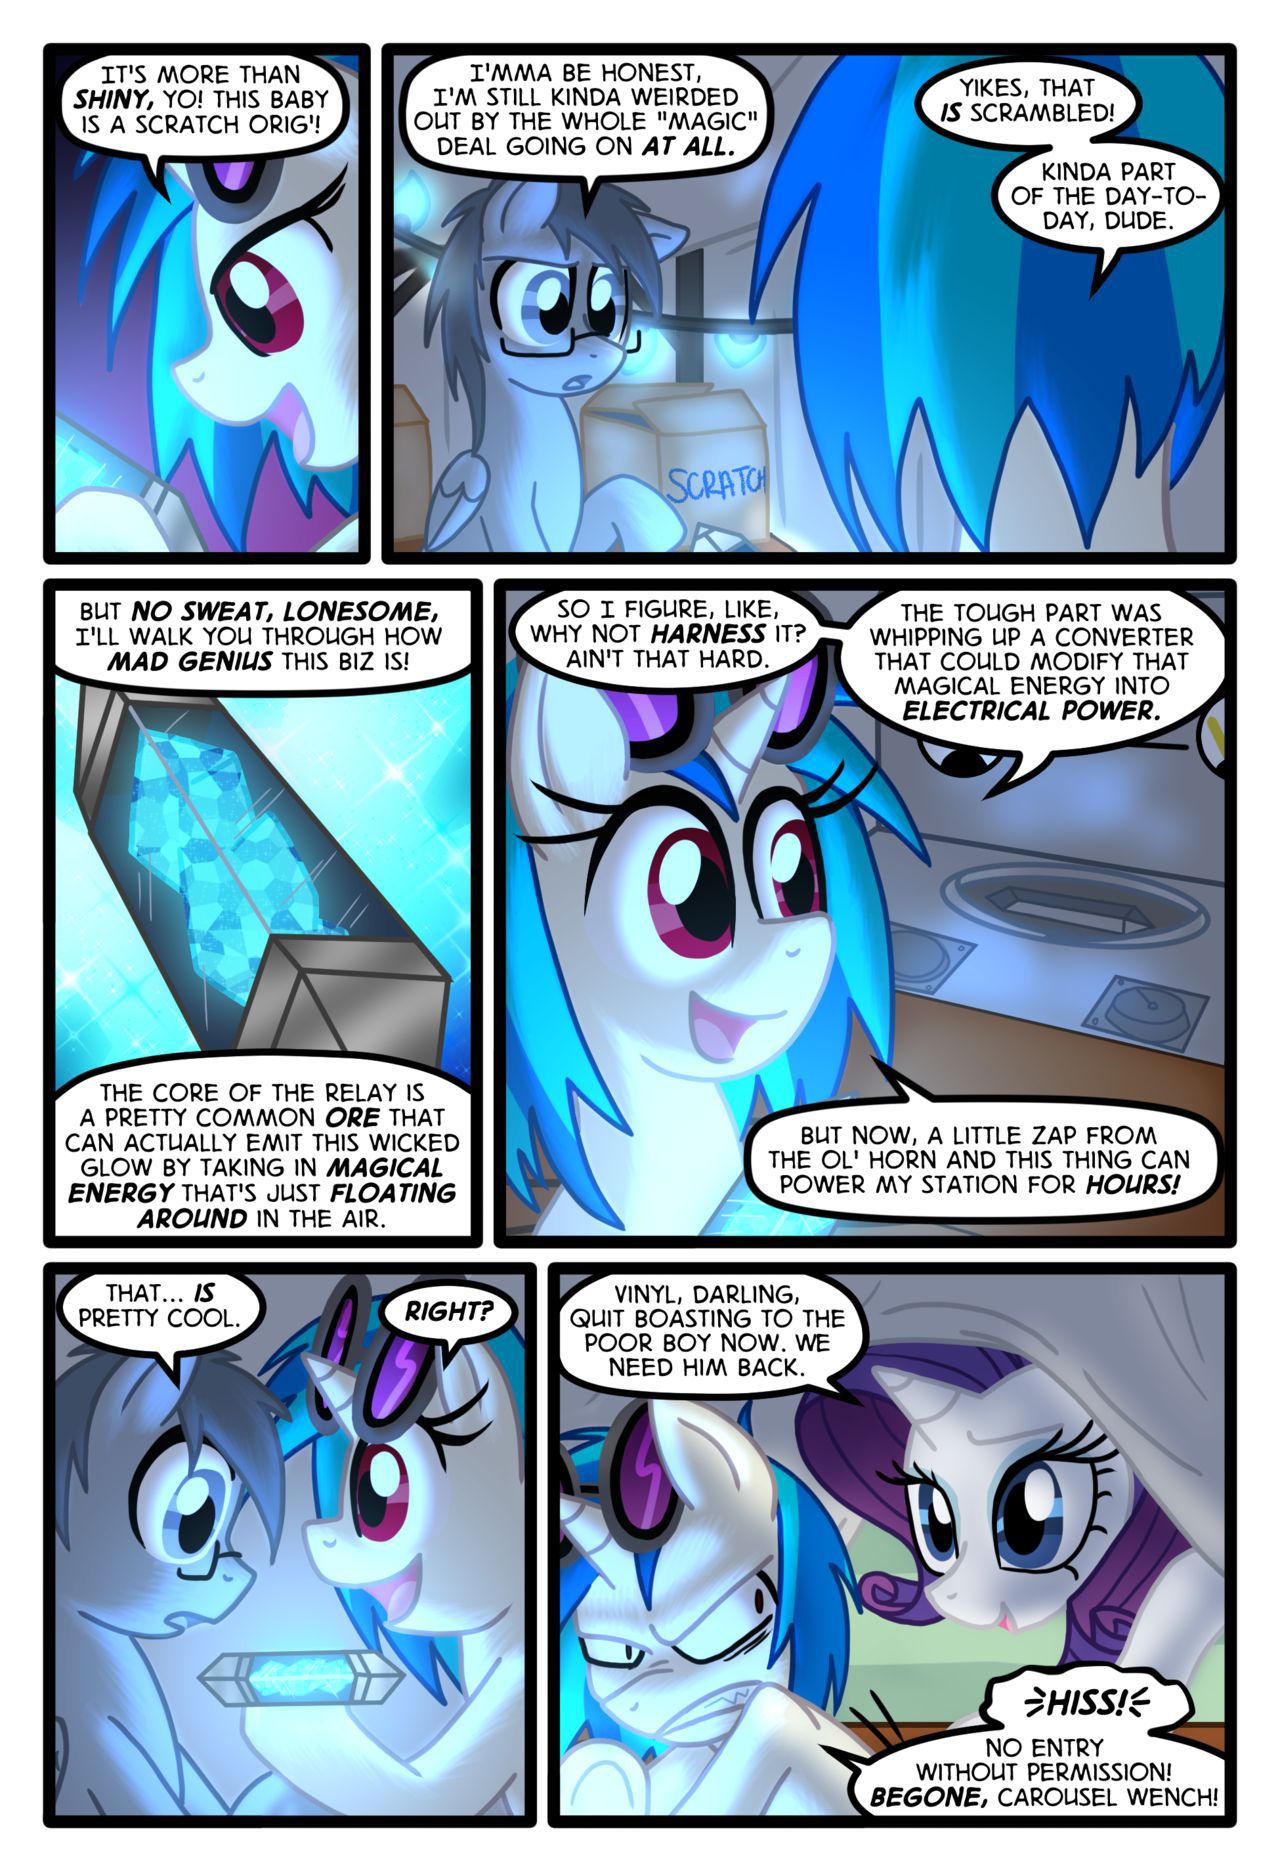 [Zaron] Lonely Hooves (My Little Pony Friendship Is Magic) [Ongoing] 56